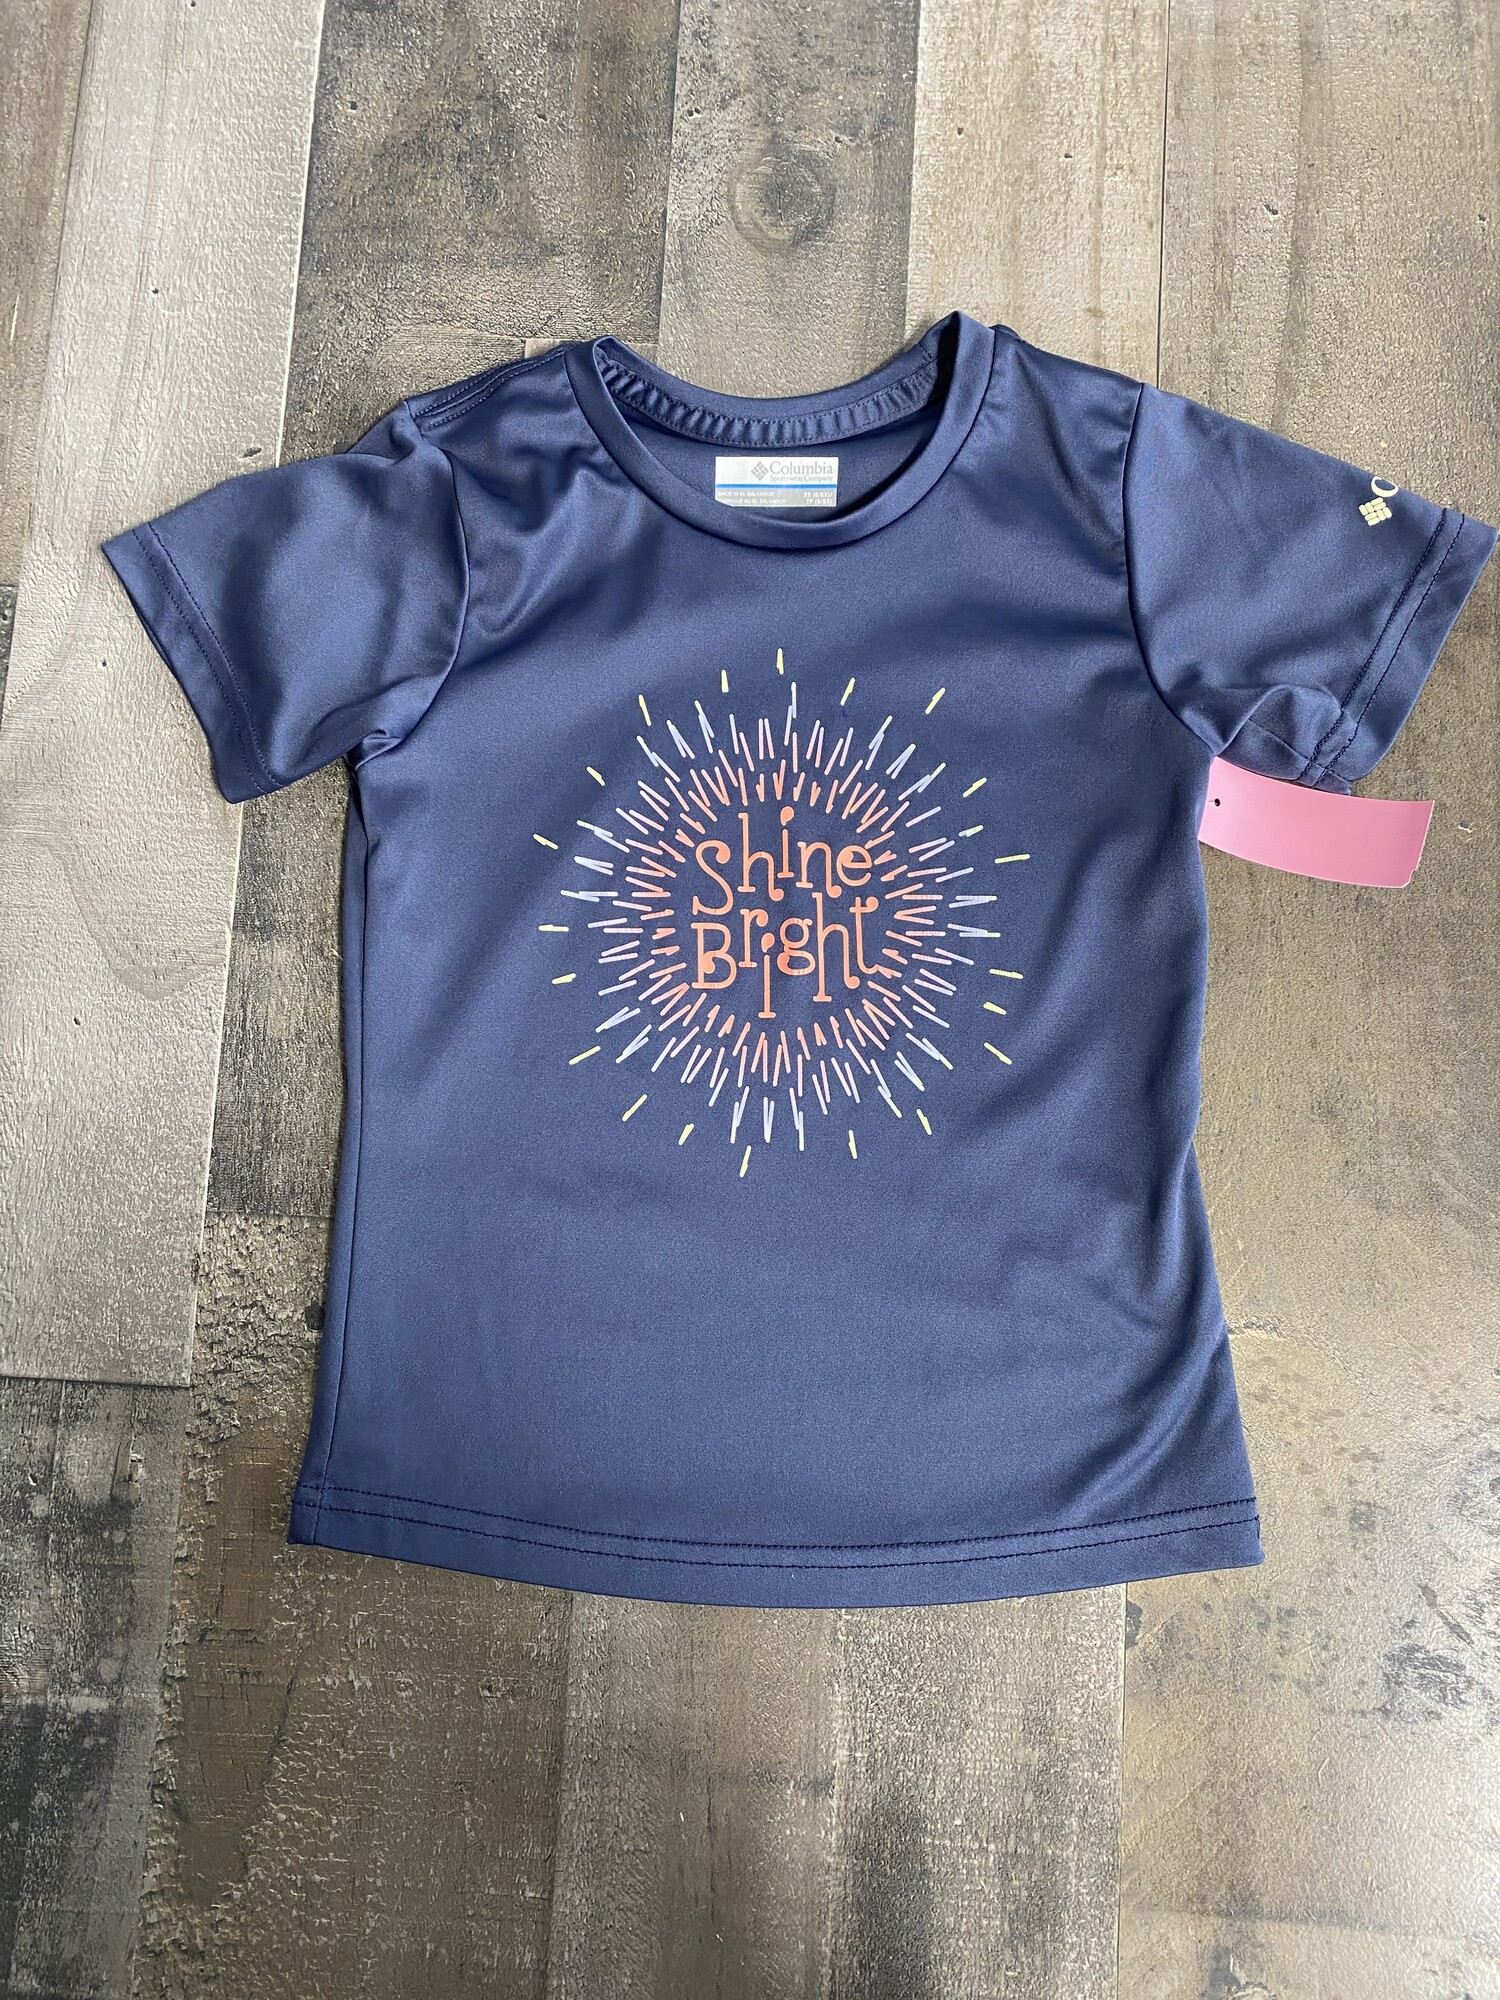 Girls Athletic Tee, Navy, Size: 6/6x